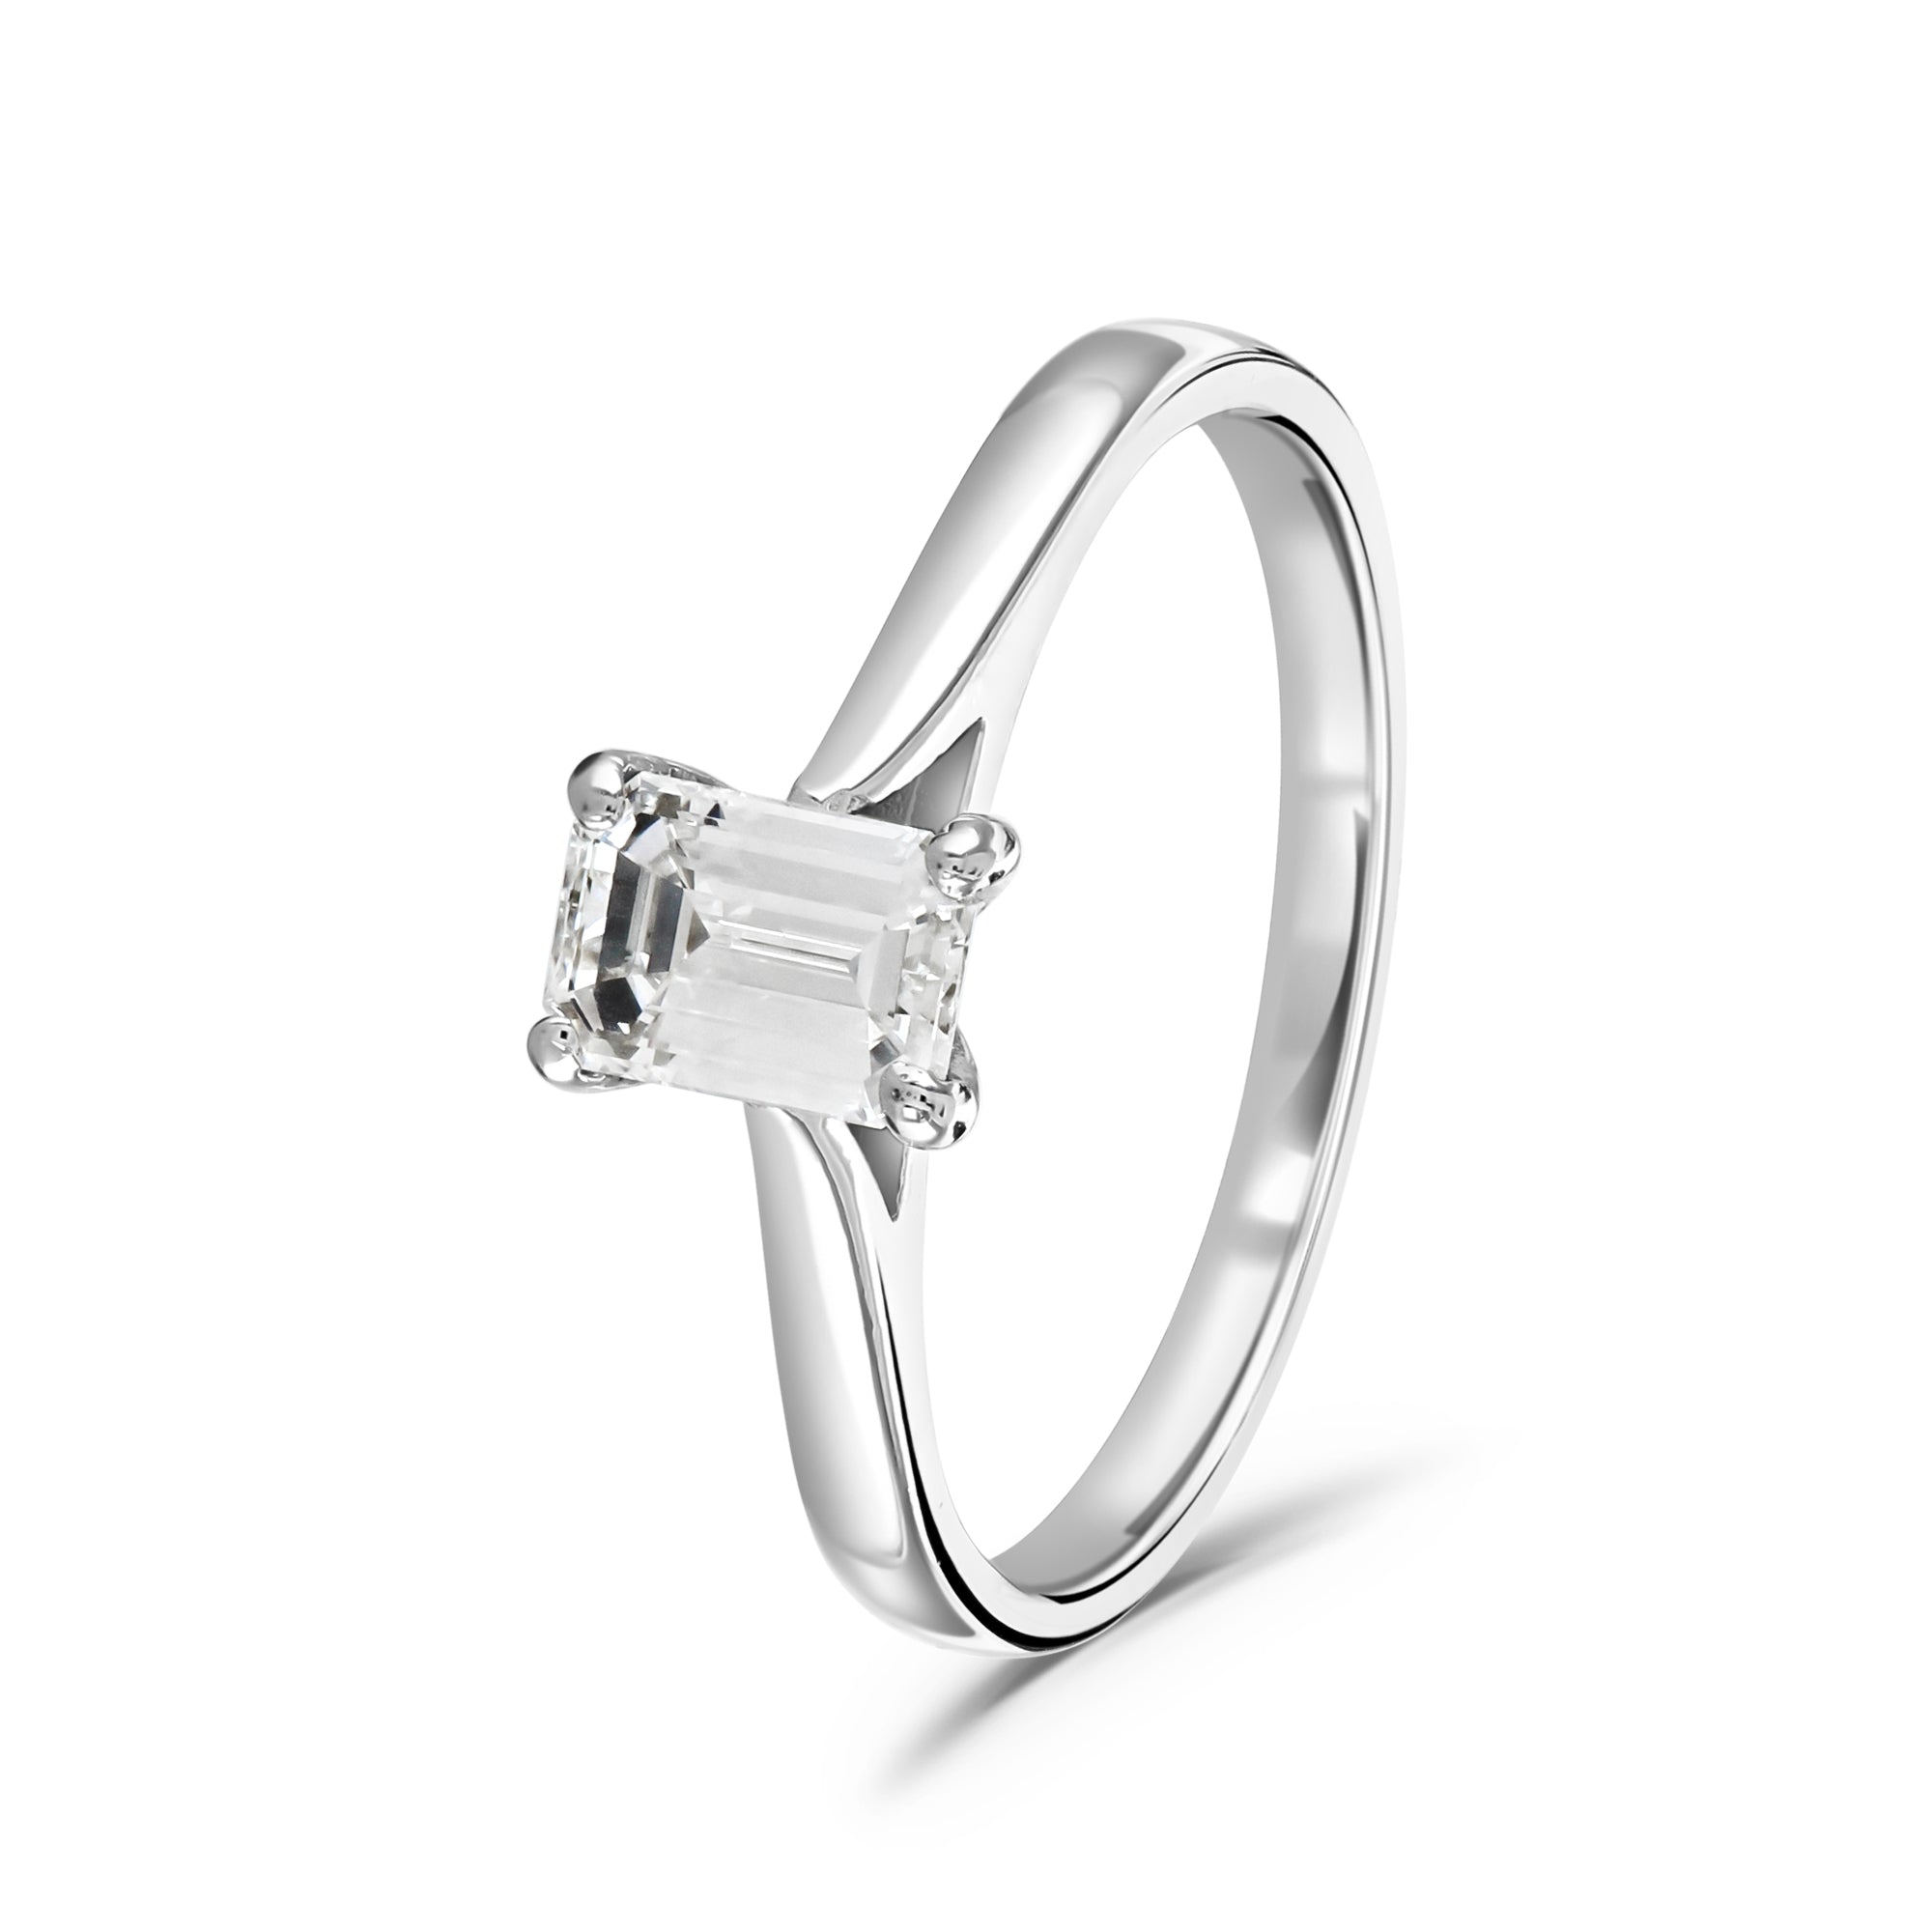 Ring - Emerald Cut Diamond Solitaire Ring